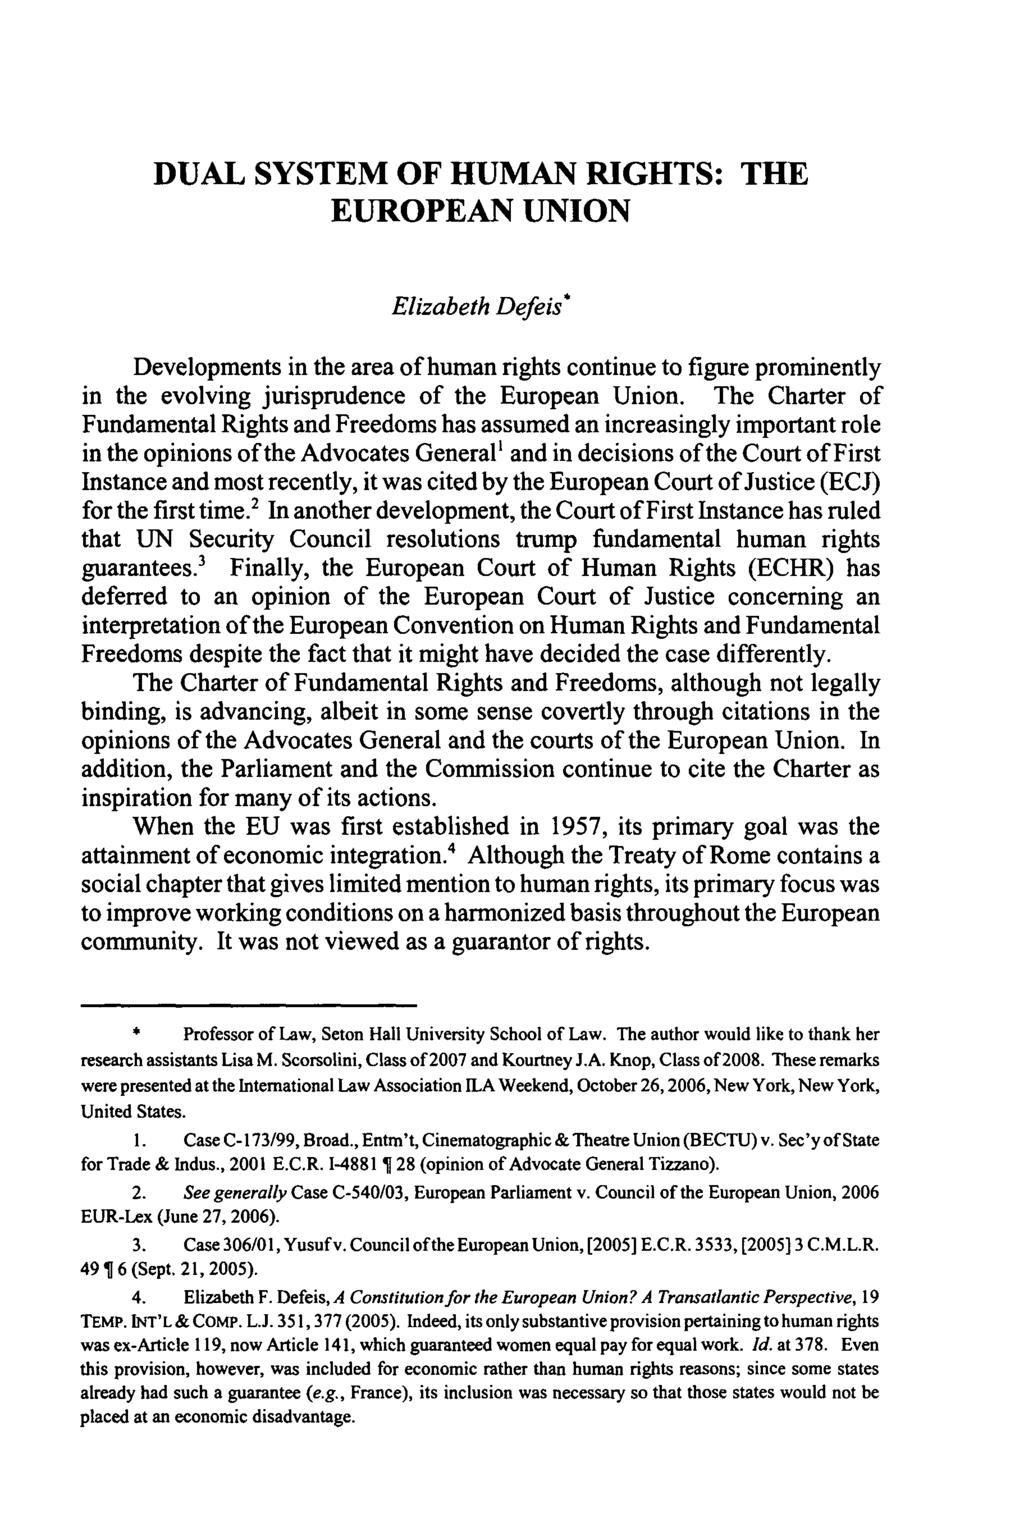 DUAL SYSTEM OF HUMAN RIGHTS: THE EUROPEAN UNION Elizabeth Defeis* Developments in the area of human rights continue to figure prominently in the evolving jurisprudence of the European Union.